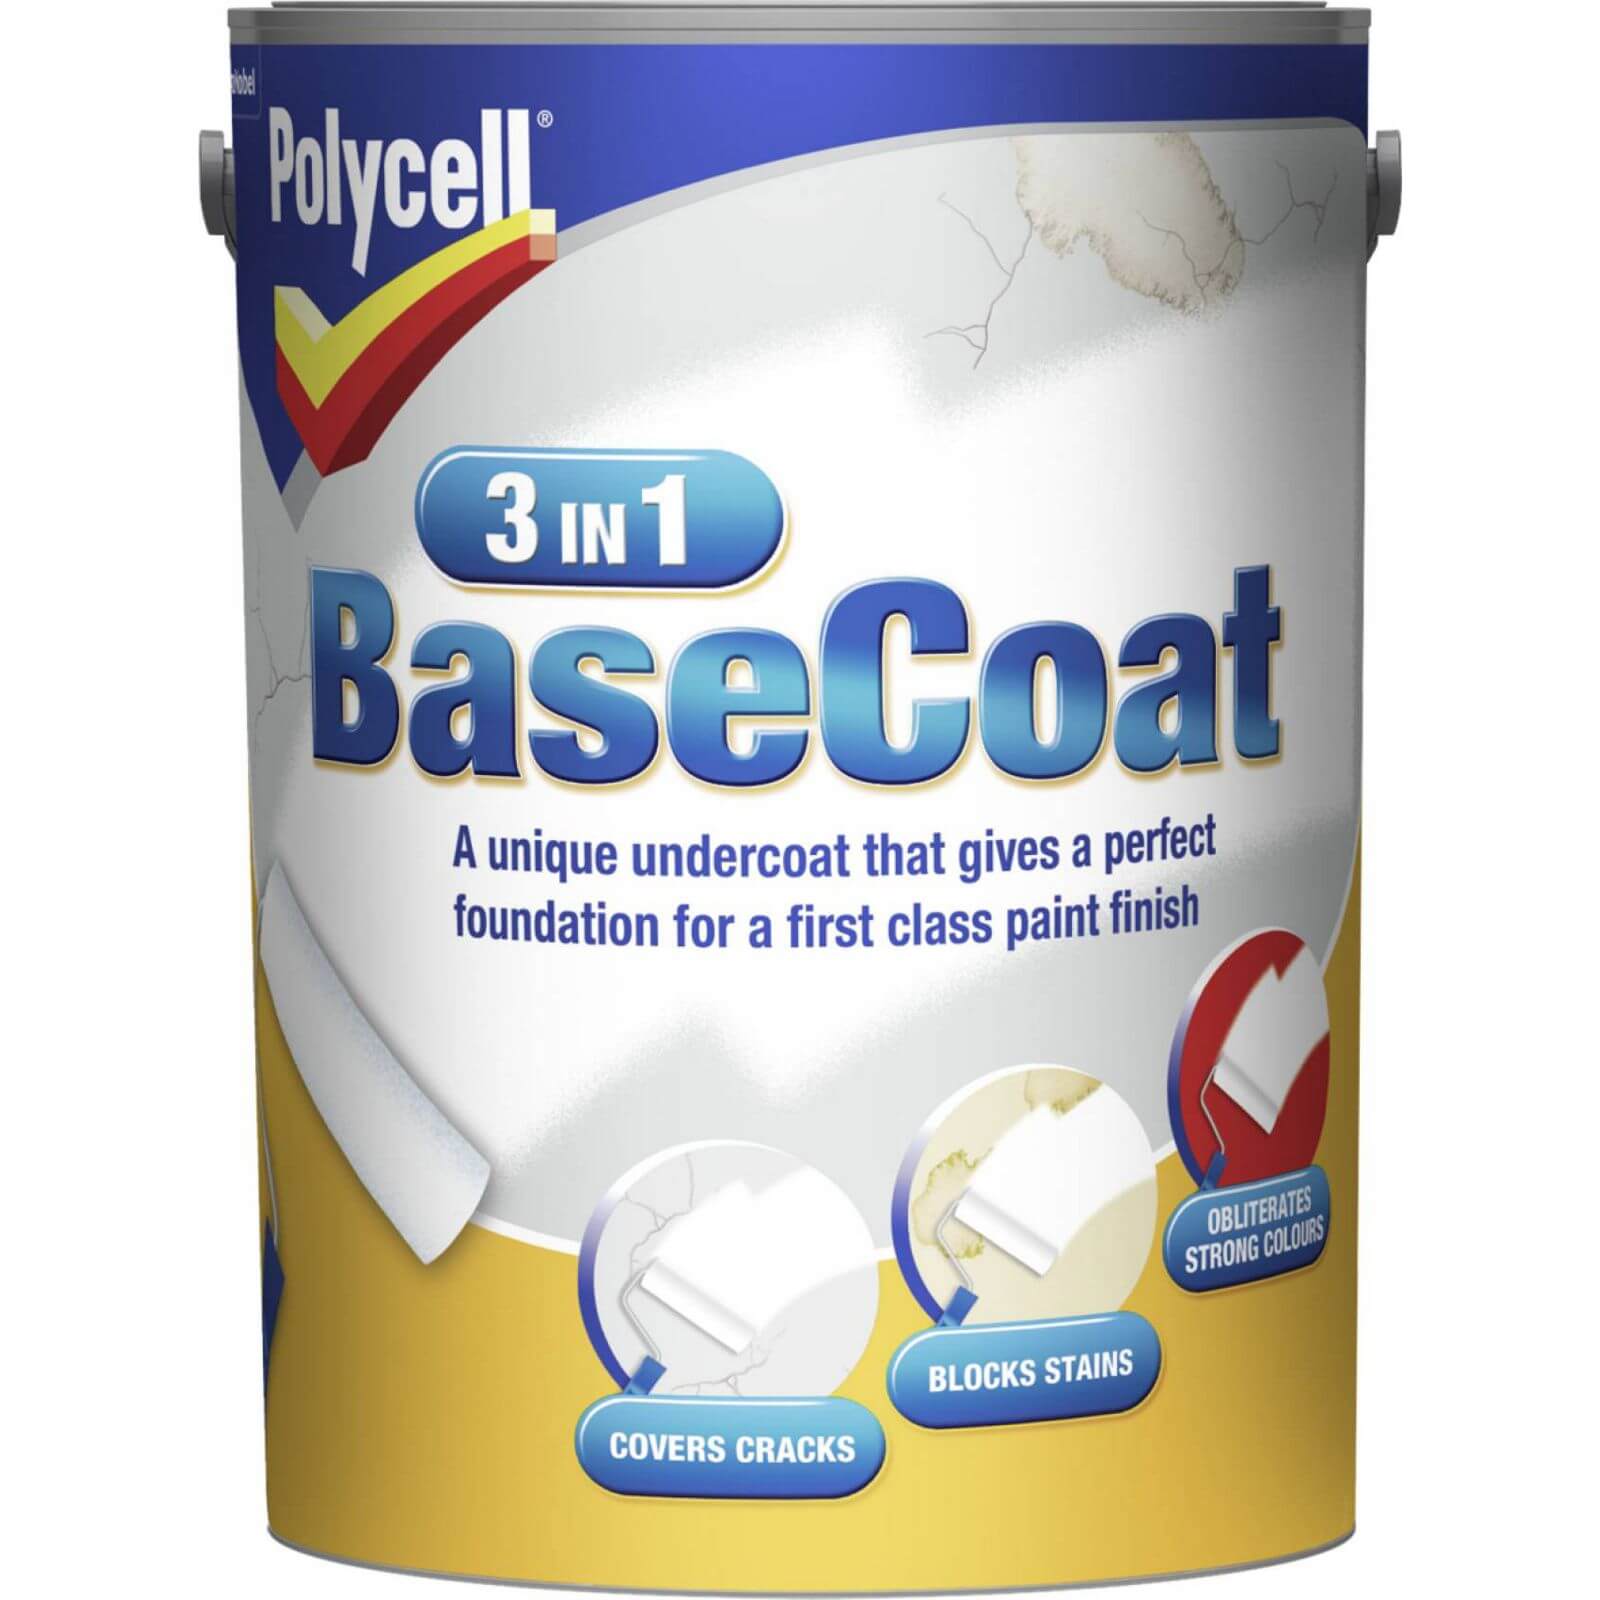 Polycell 3 in 1 Basecoat - 5L